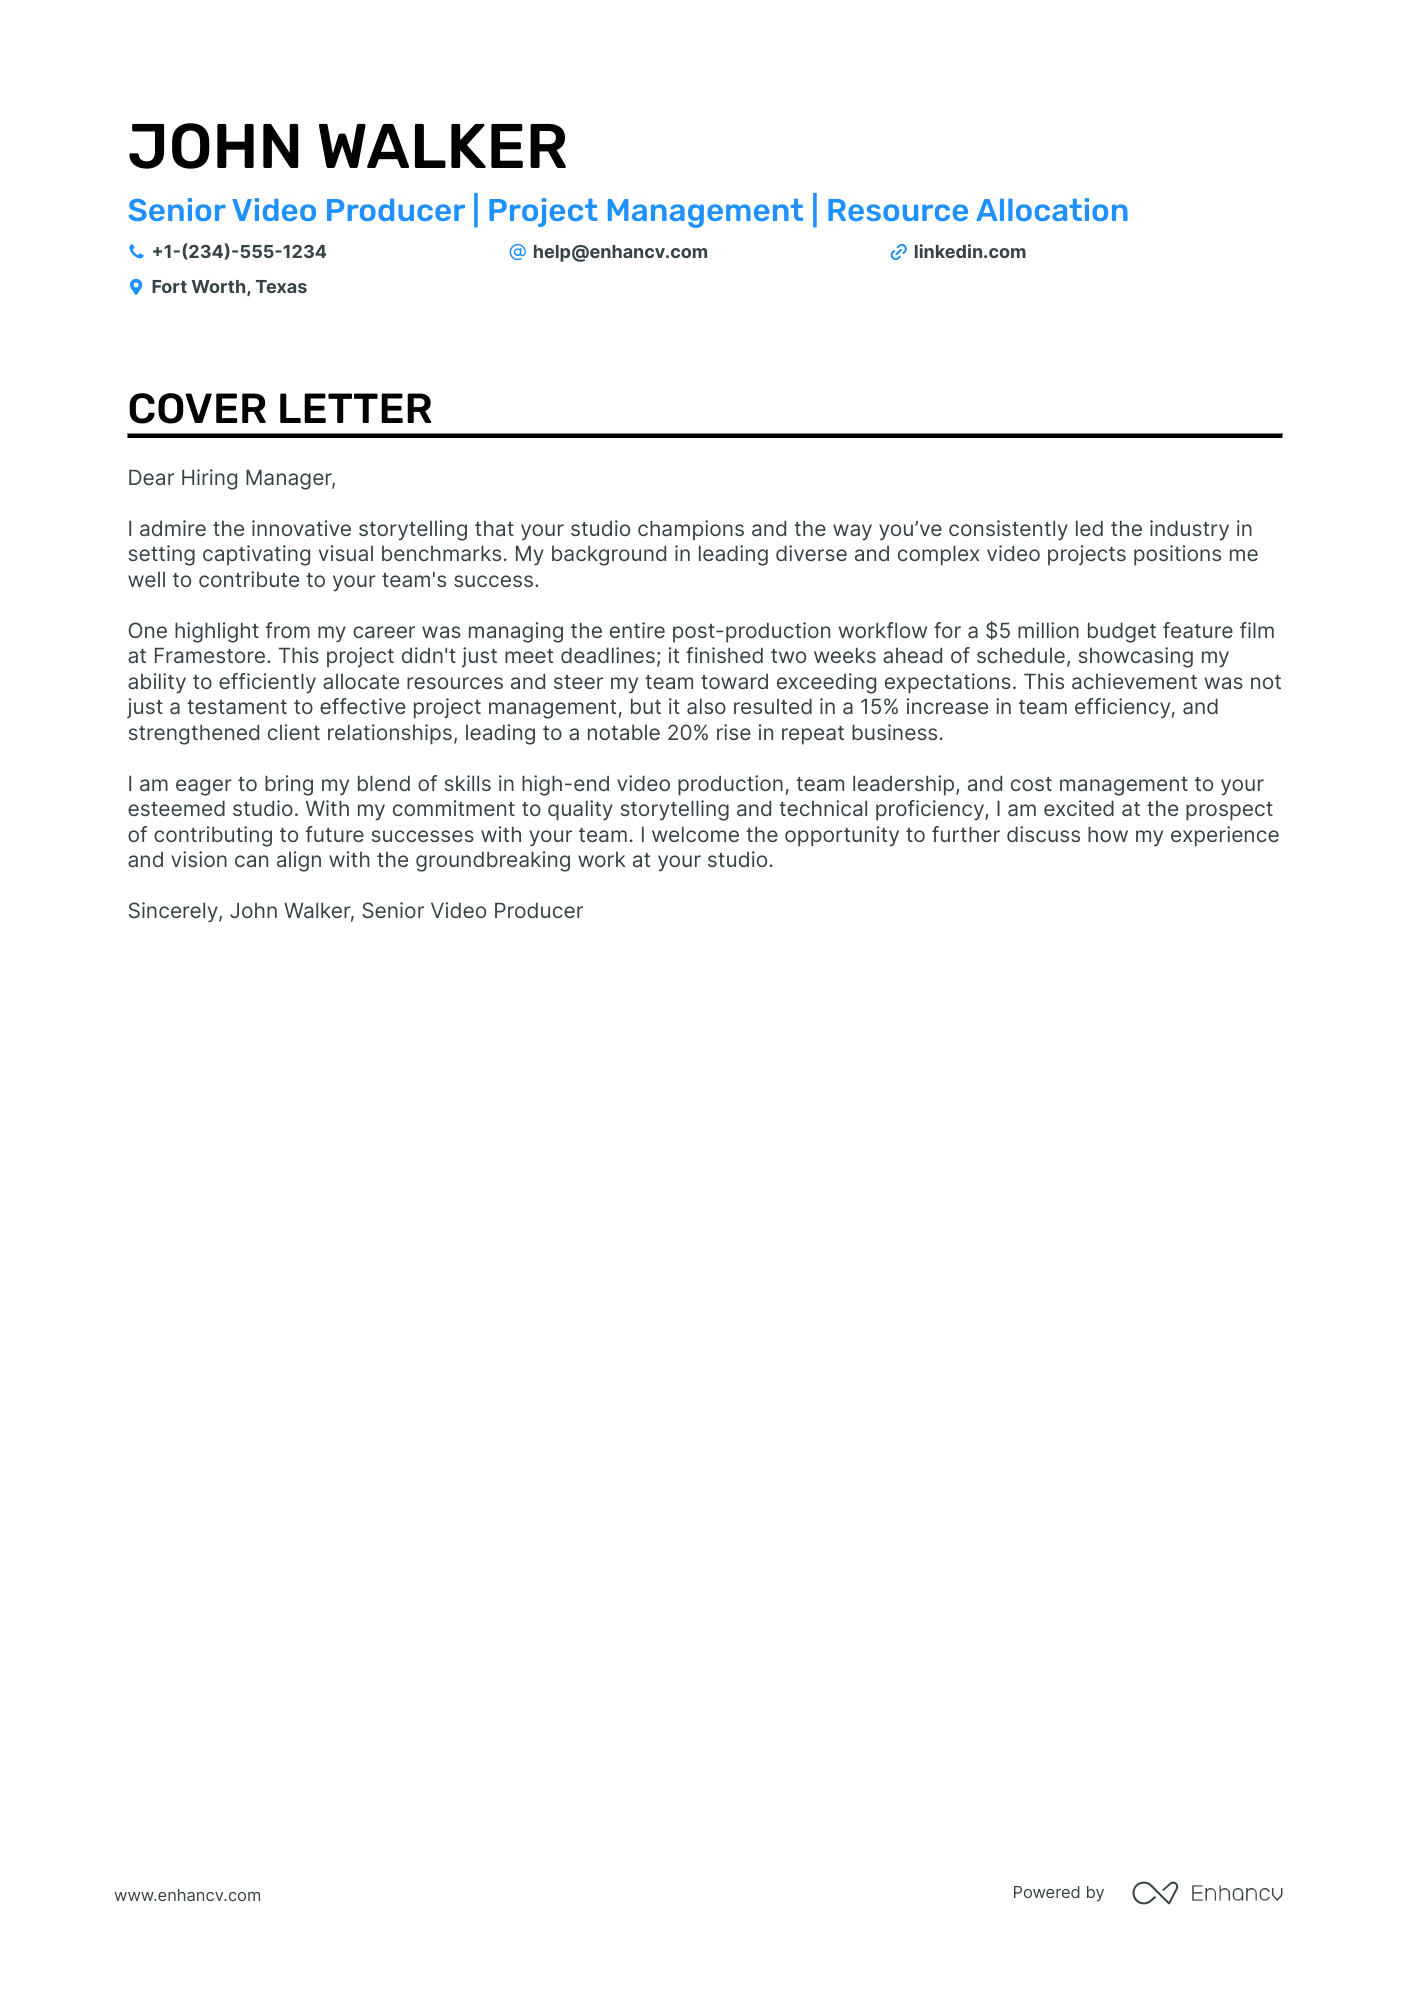 cover letter for freelancer project proposal